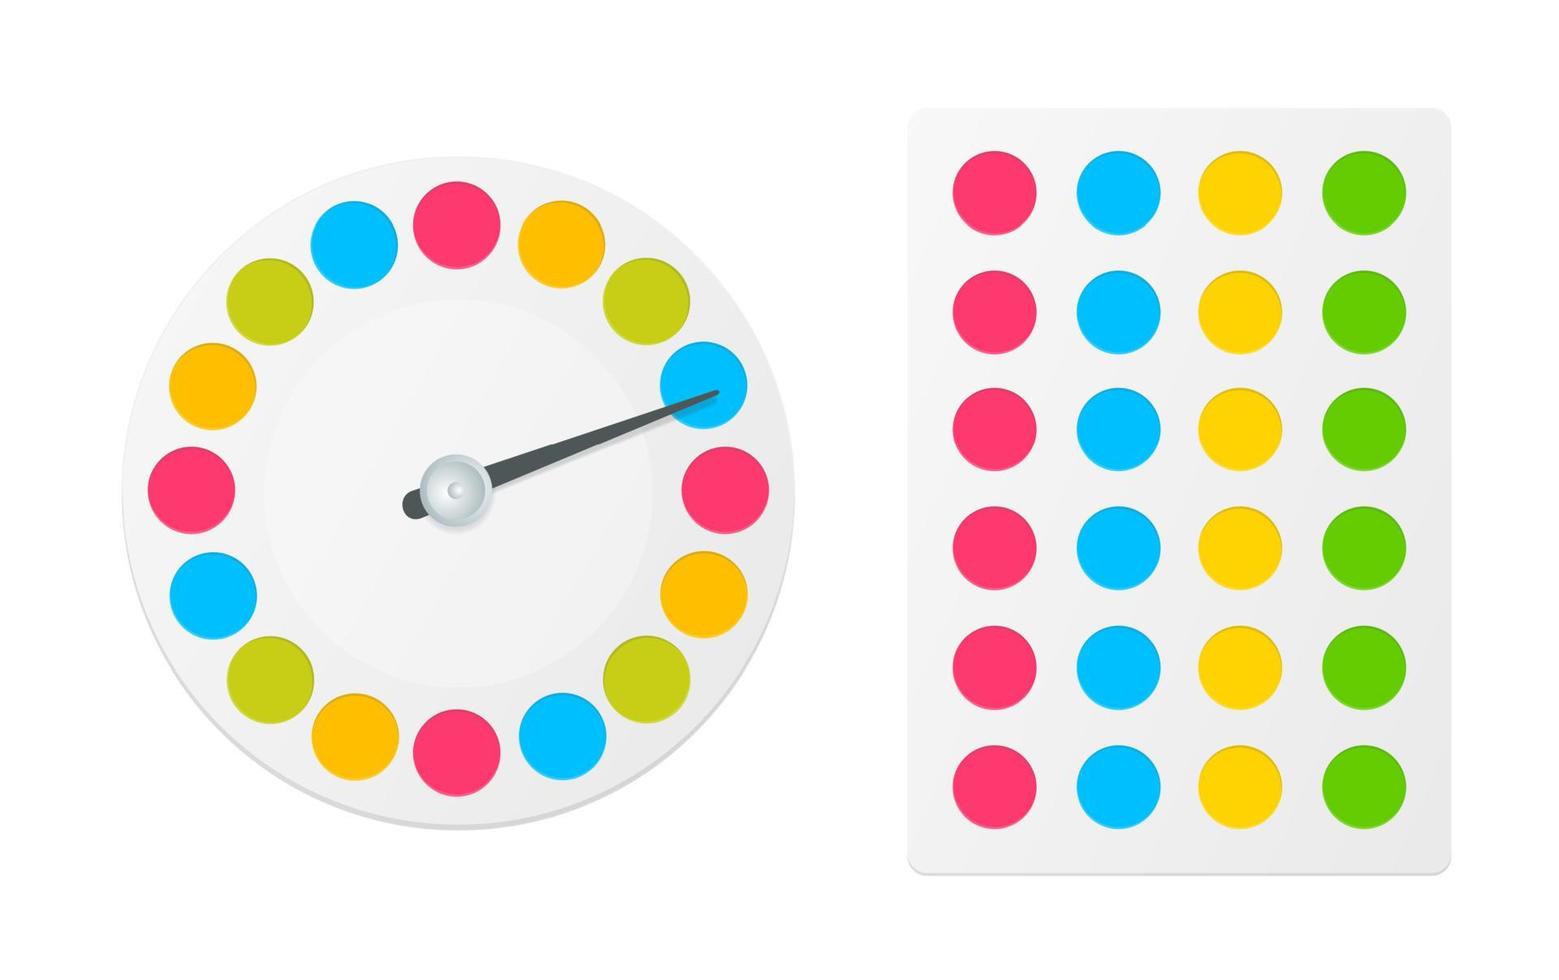 Twister Game Board and Mat with Color Circles Set. Vector